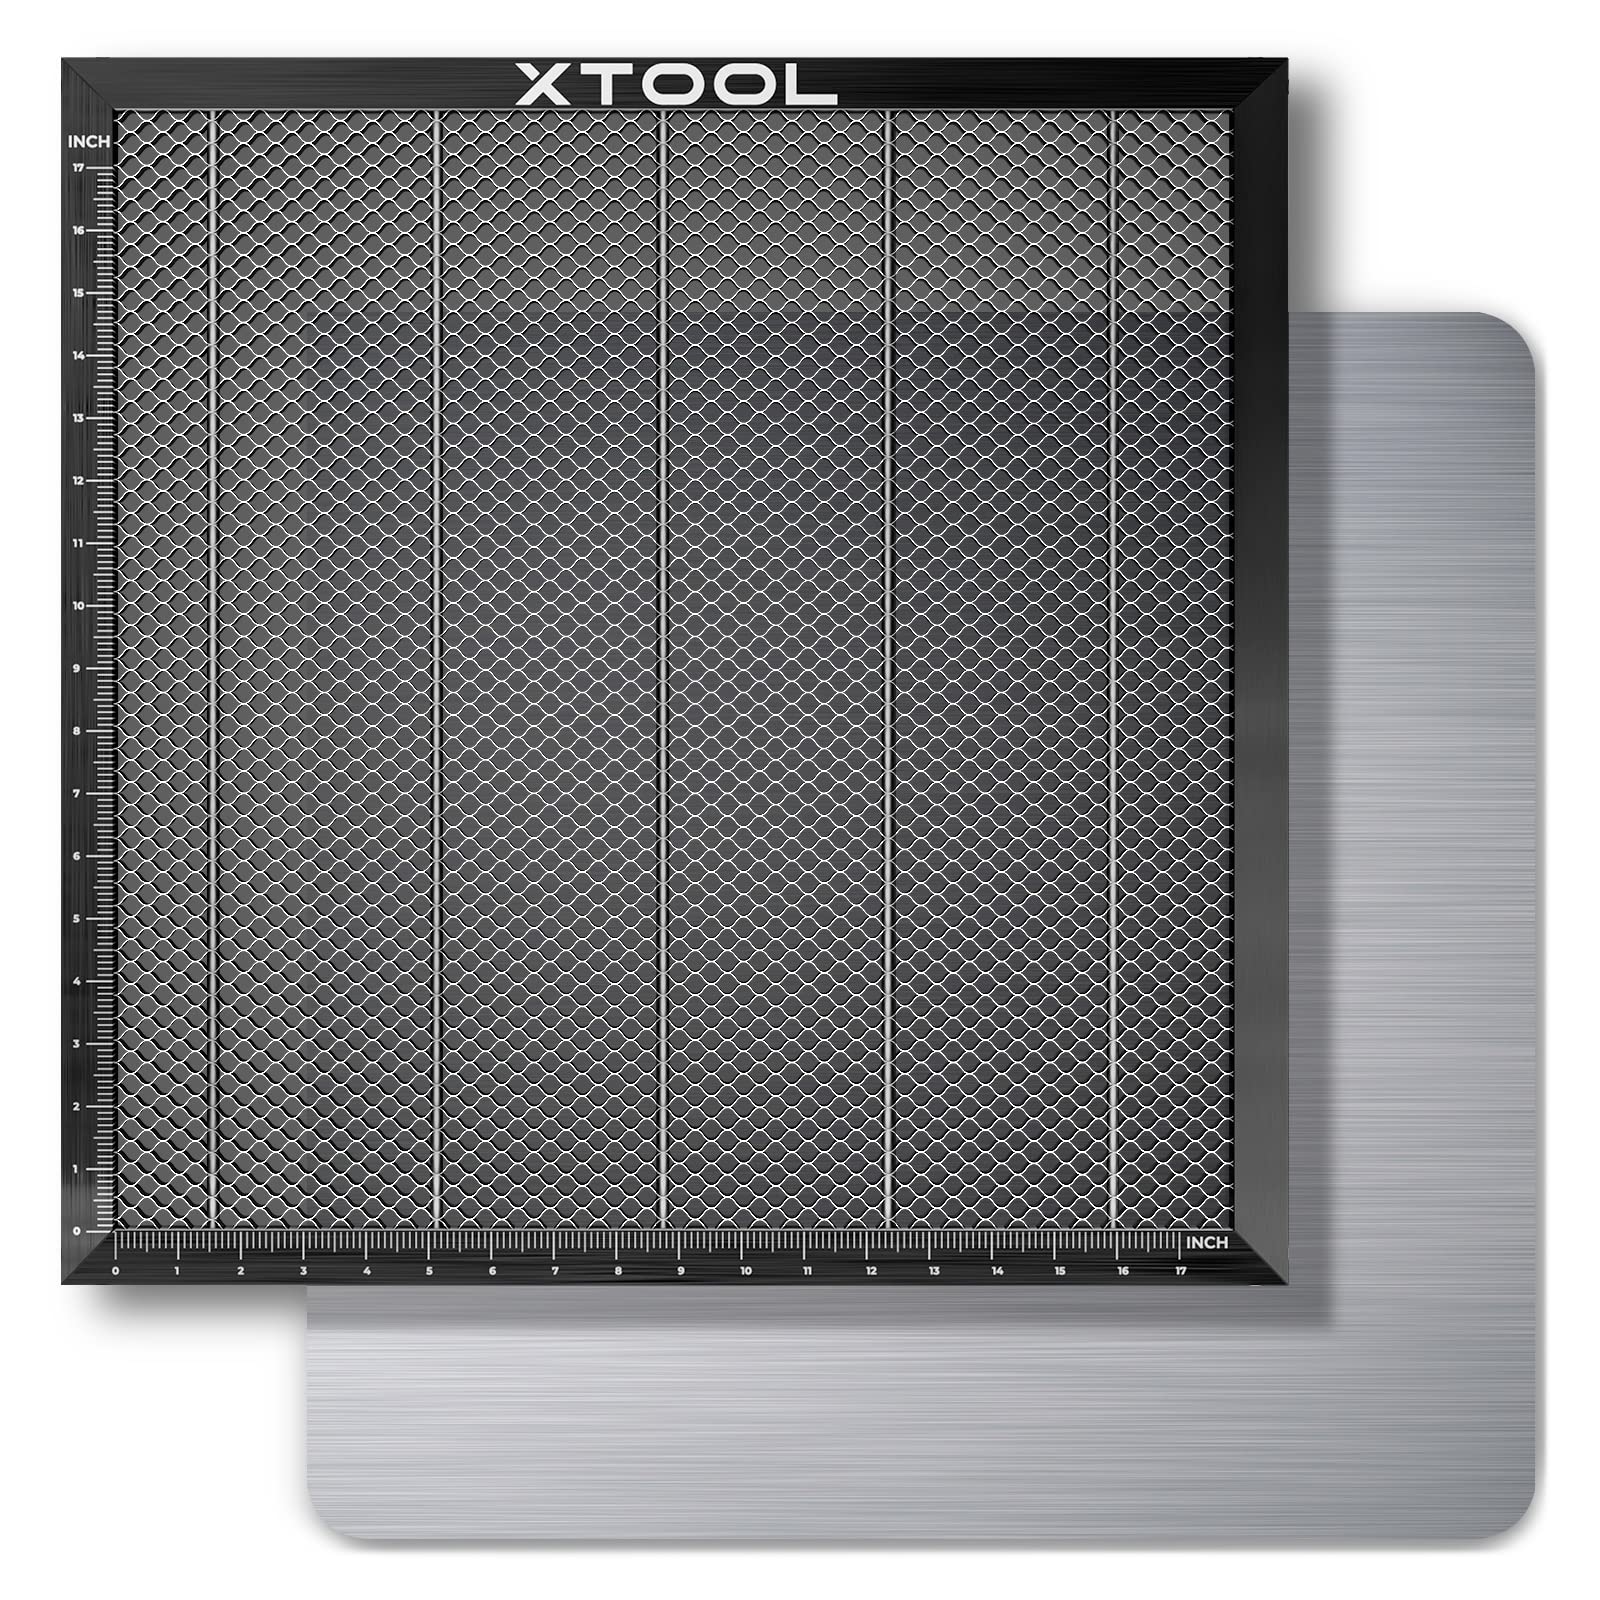 xTool Enclosure Max, Portable & Foldable Cover for Laser Engraver,  Fireproof, Safety & Health Protective for xTool D1/D1 Pro and Other Open  Laser